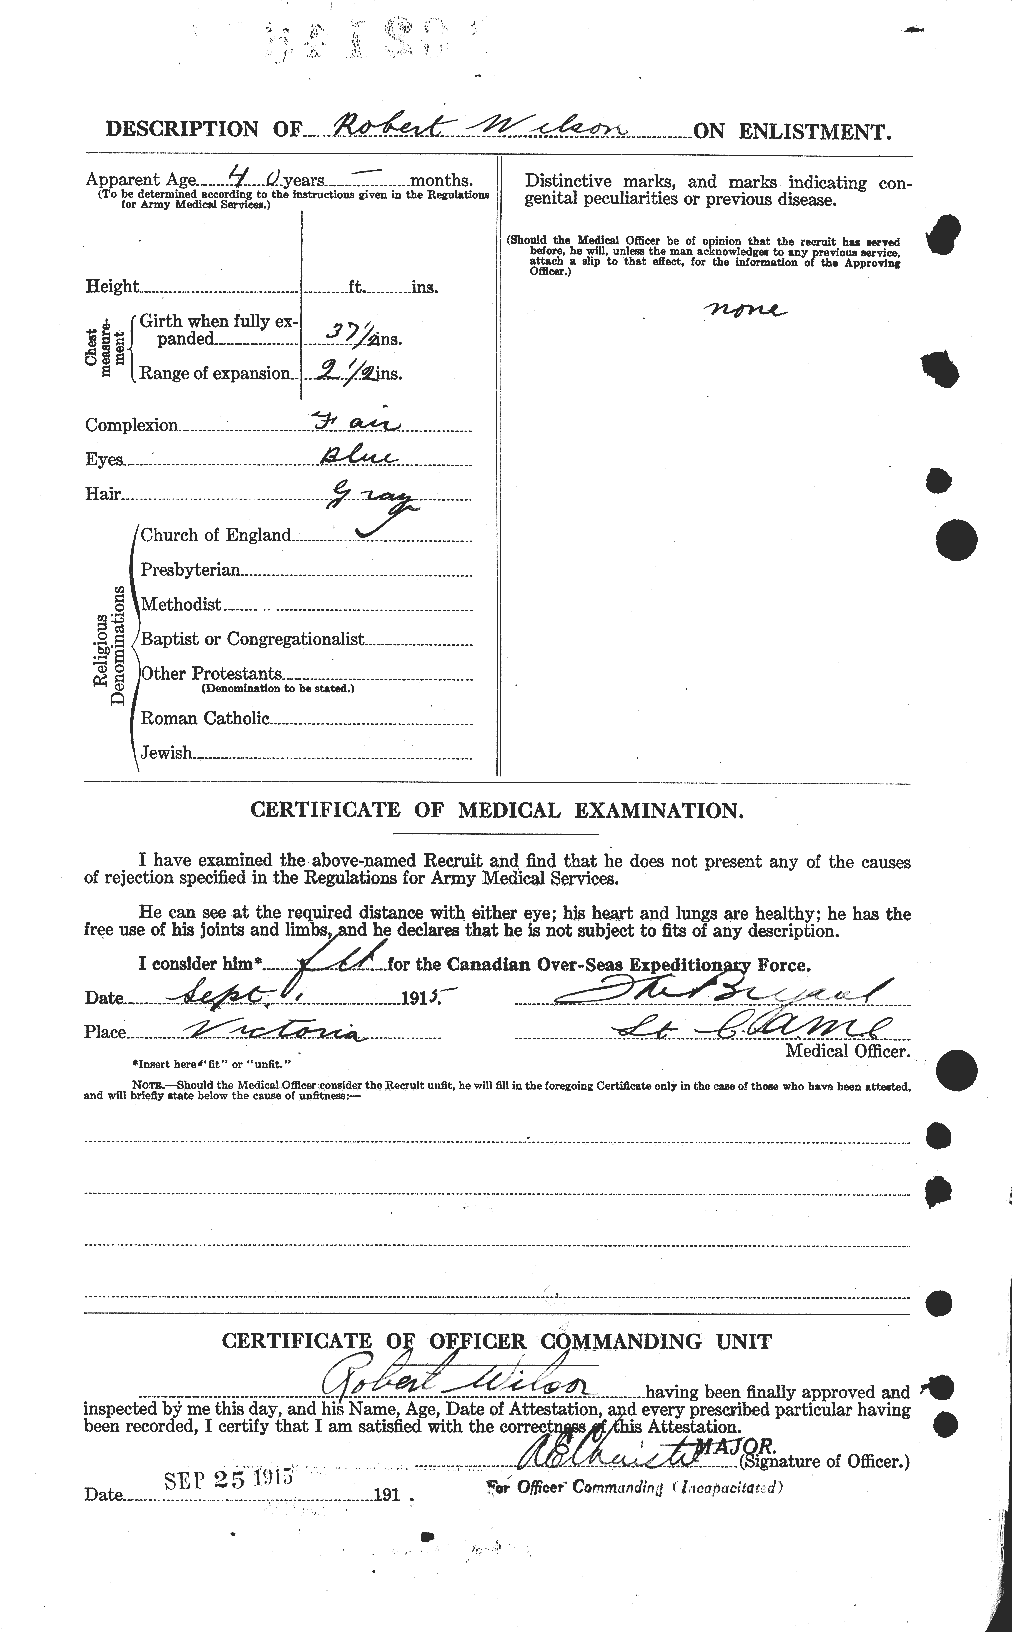 Personnel Records of the First World War - CEF 680914b